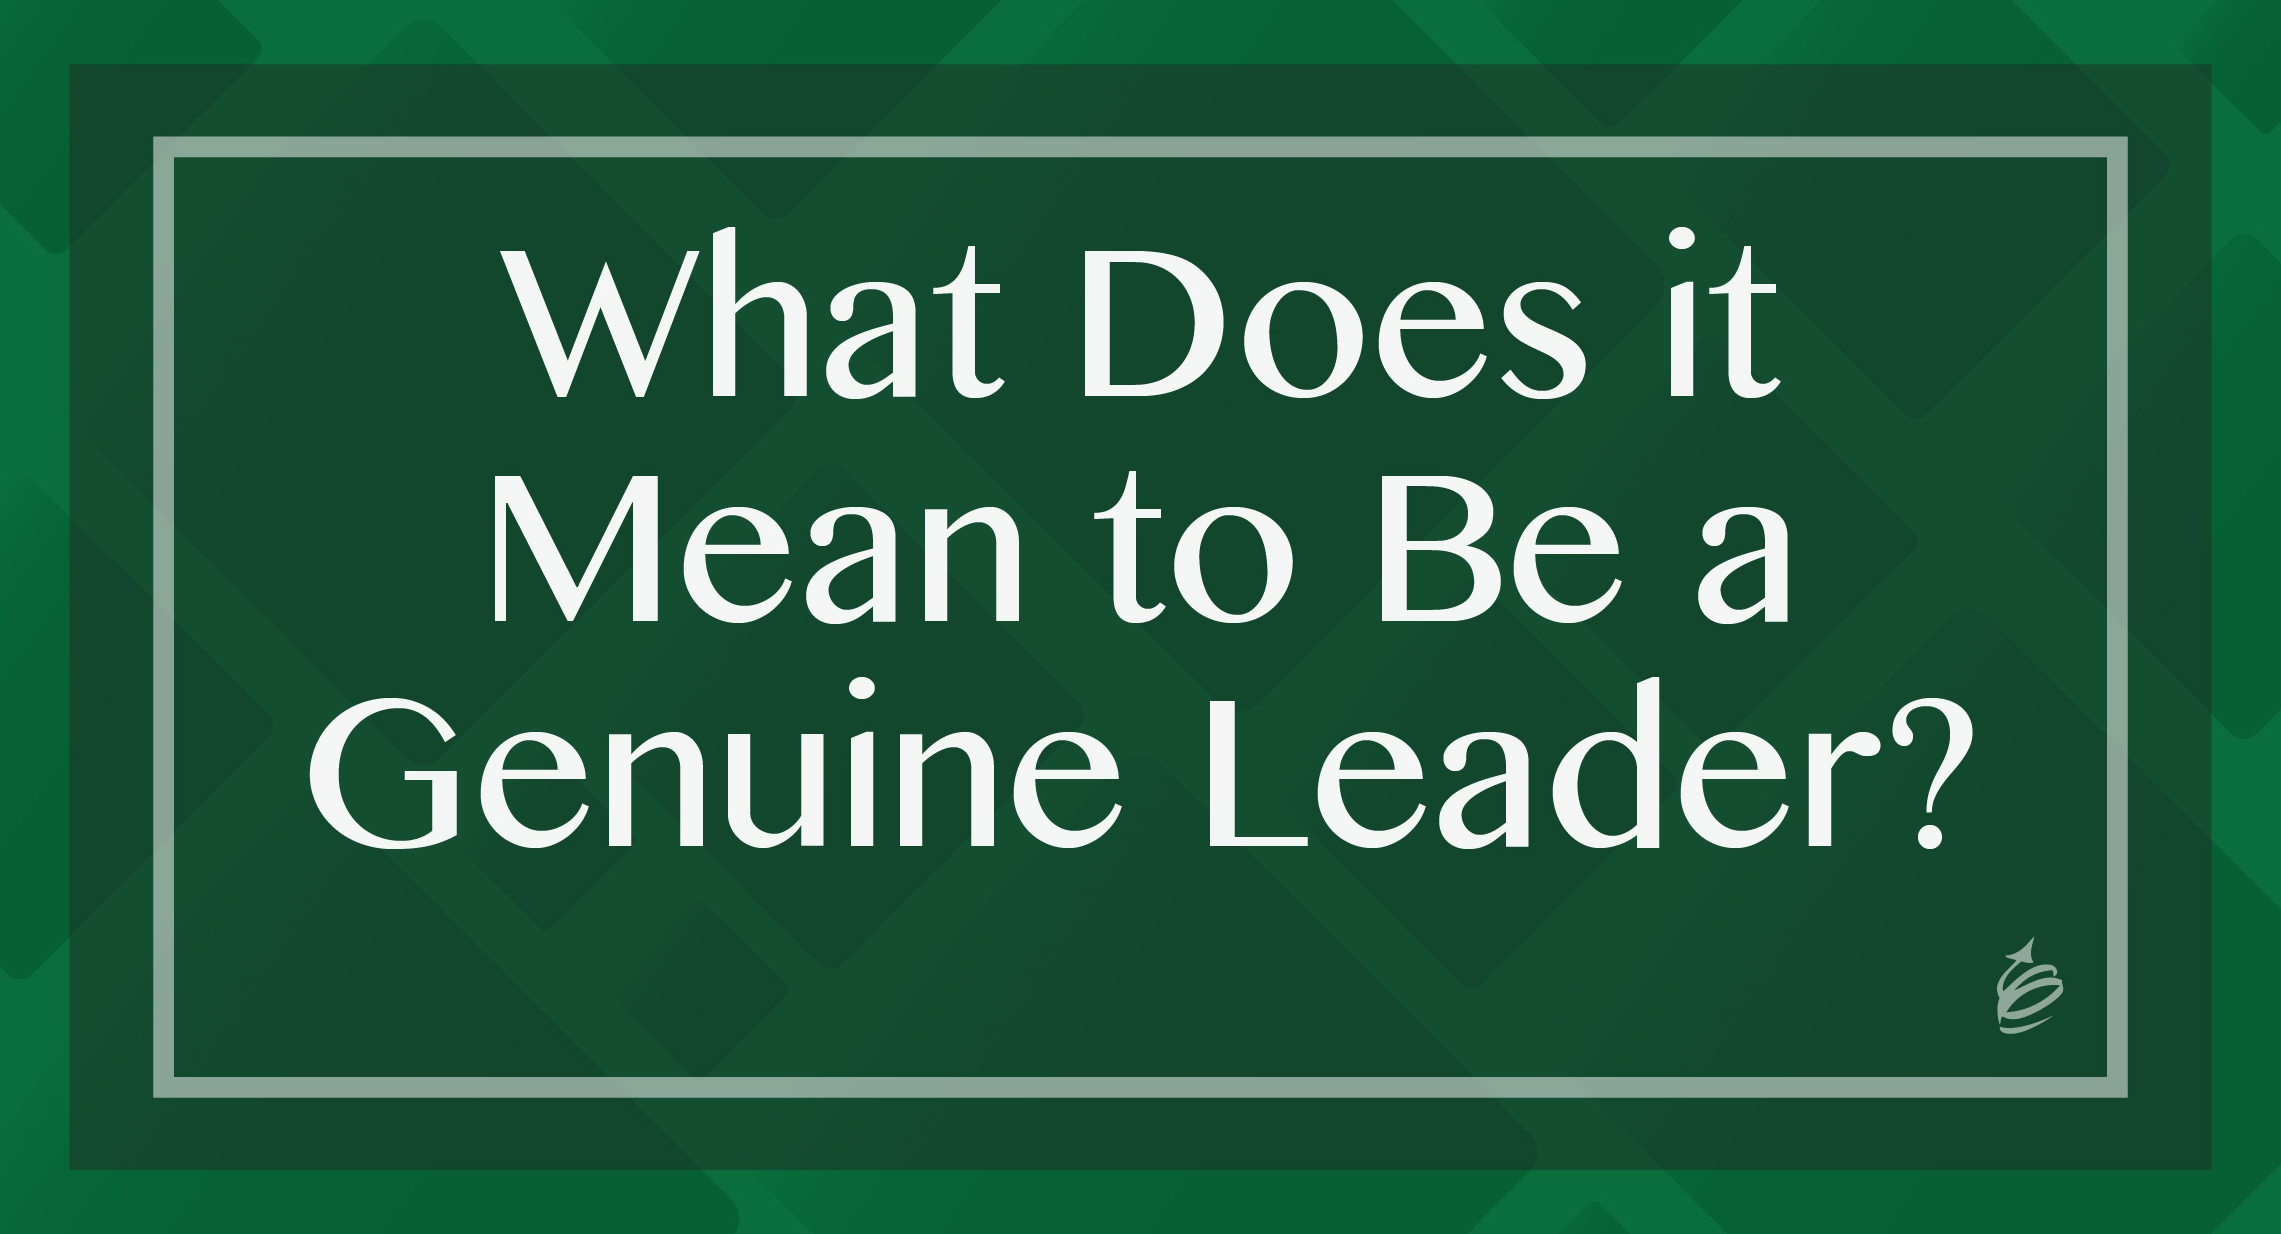 What Does it Mean to Be a Genuine Leader? - The Kevin Eikenberry Group